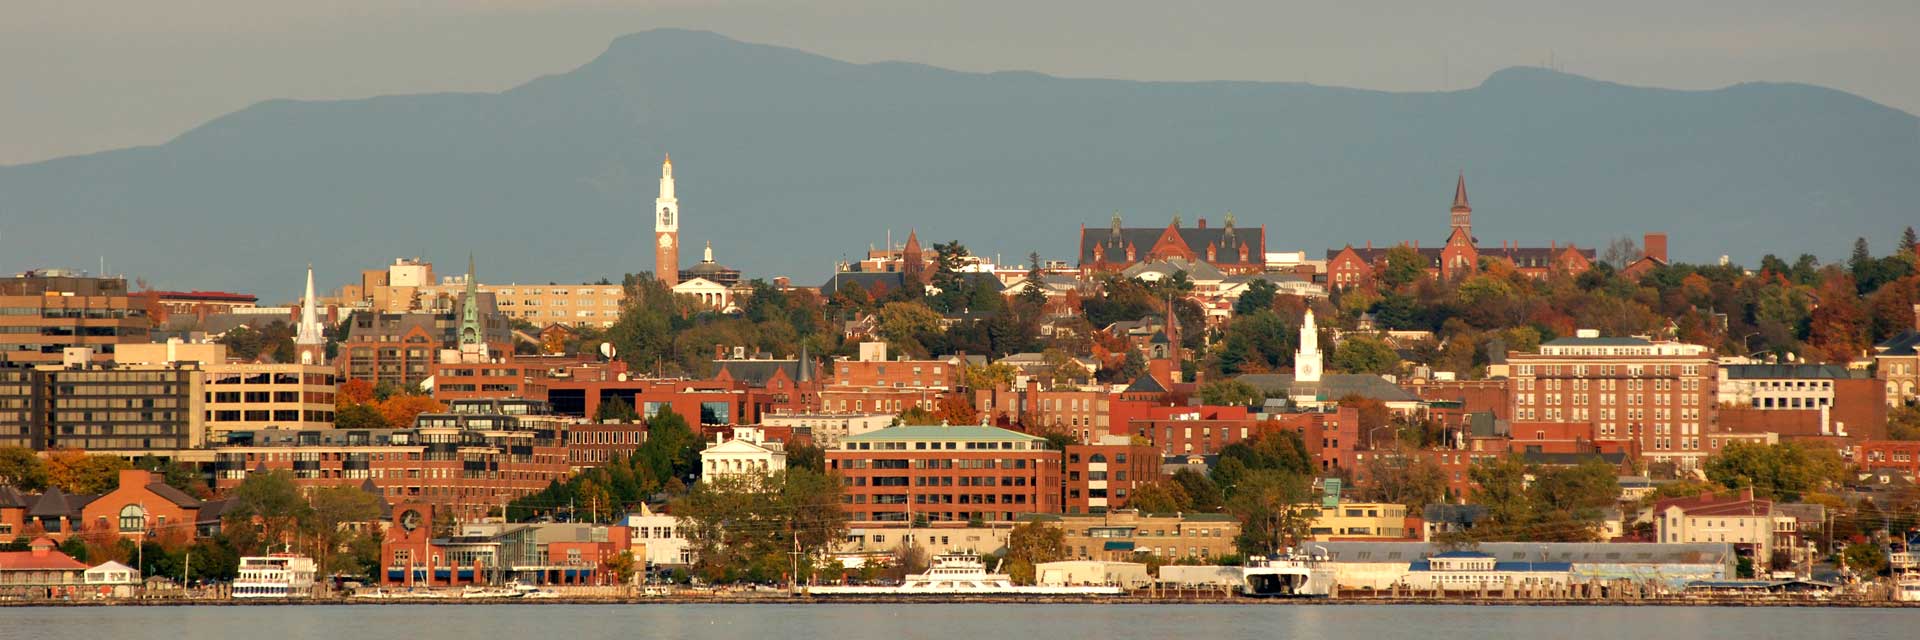 Burlington, Vermont waterfront with mountains in the distance